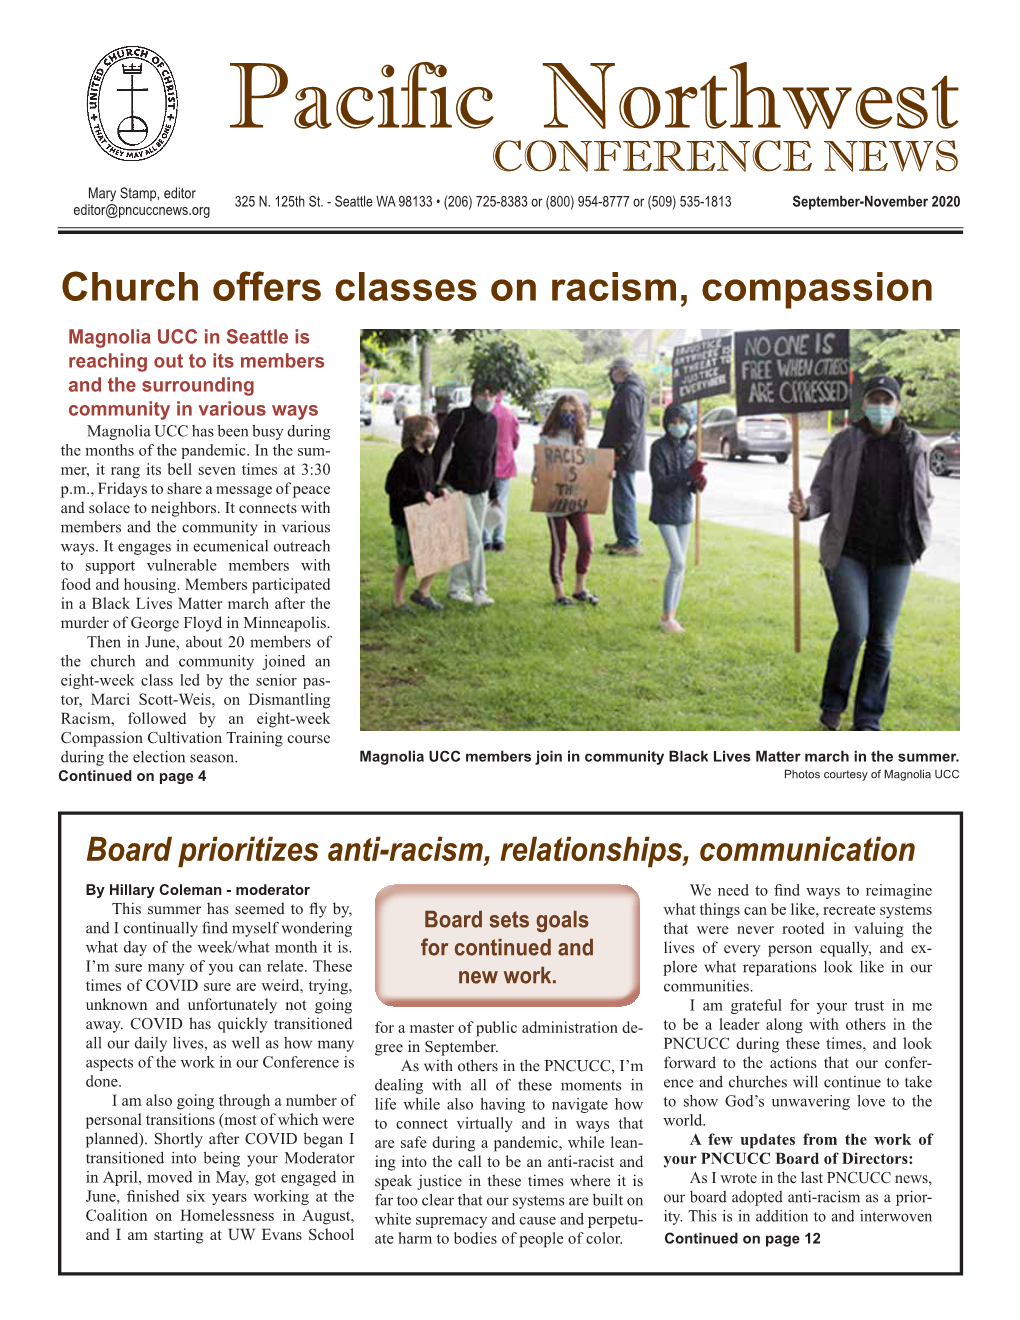 Pacific Northwest Conference News - September-November 2020 - Page 1 Pacific Northwest CONFERENCE NEWS Mary Stamp, Editor 325 N